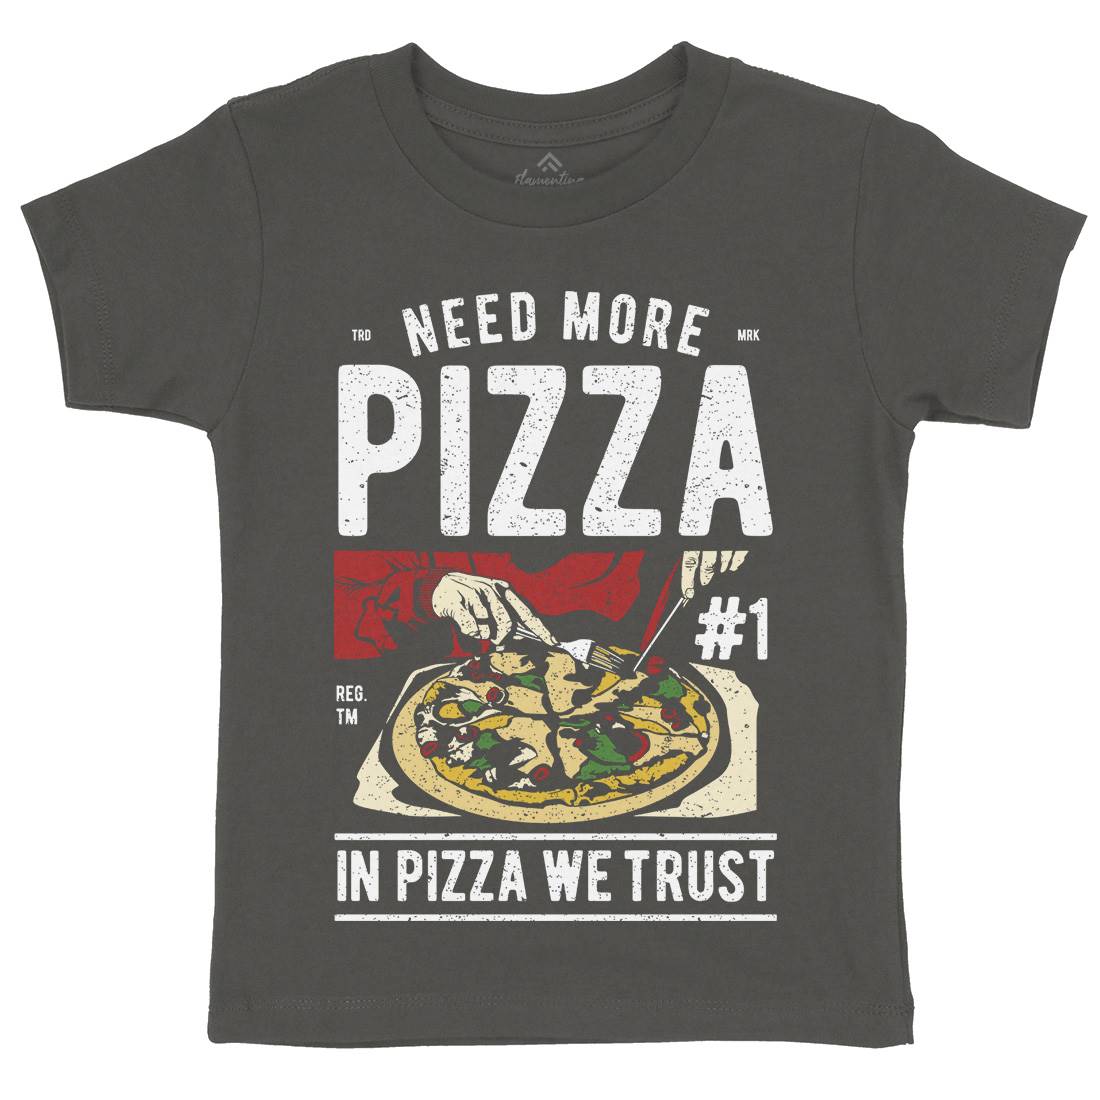 Need More Pizza Kids Crew Neck T-Shirt Food A727